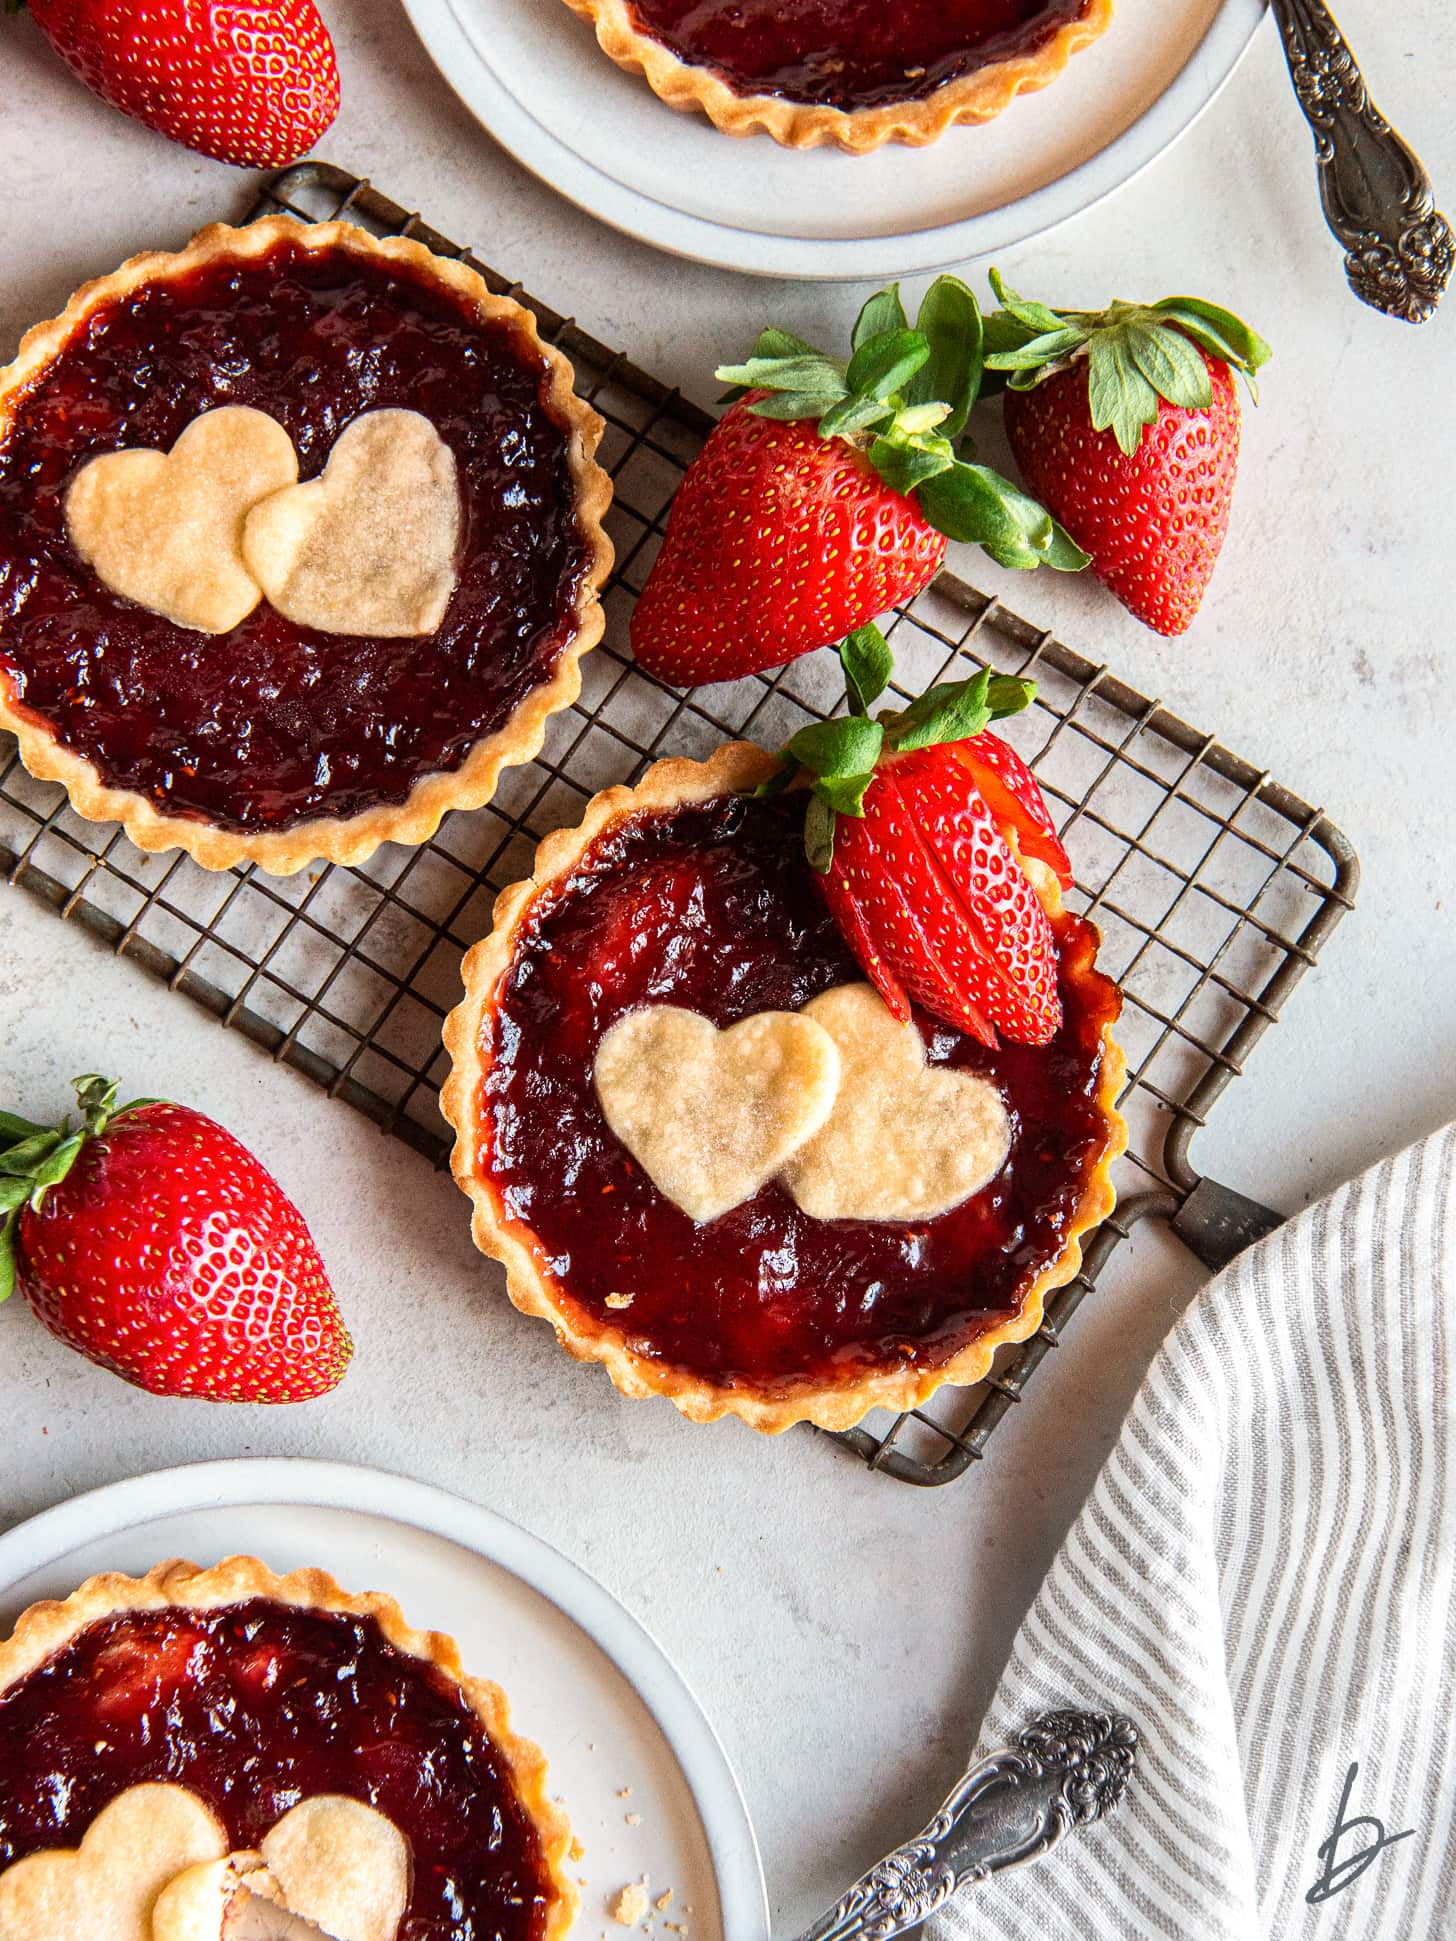 two strawberry jam tarts with shortbread heart cut out and strawberry garnish on small wire cooling rack.